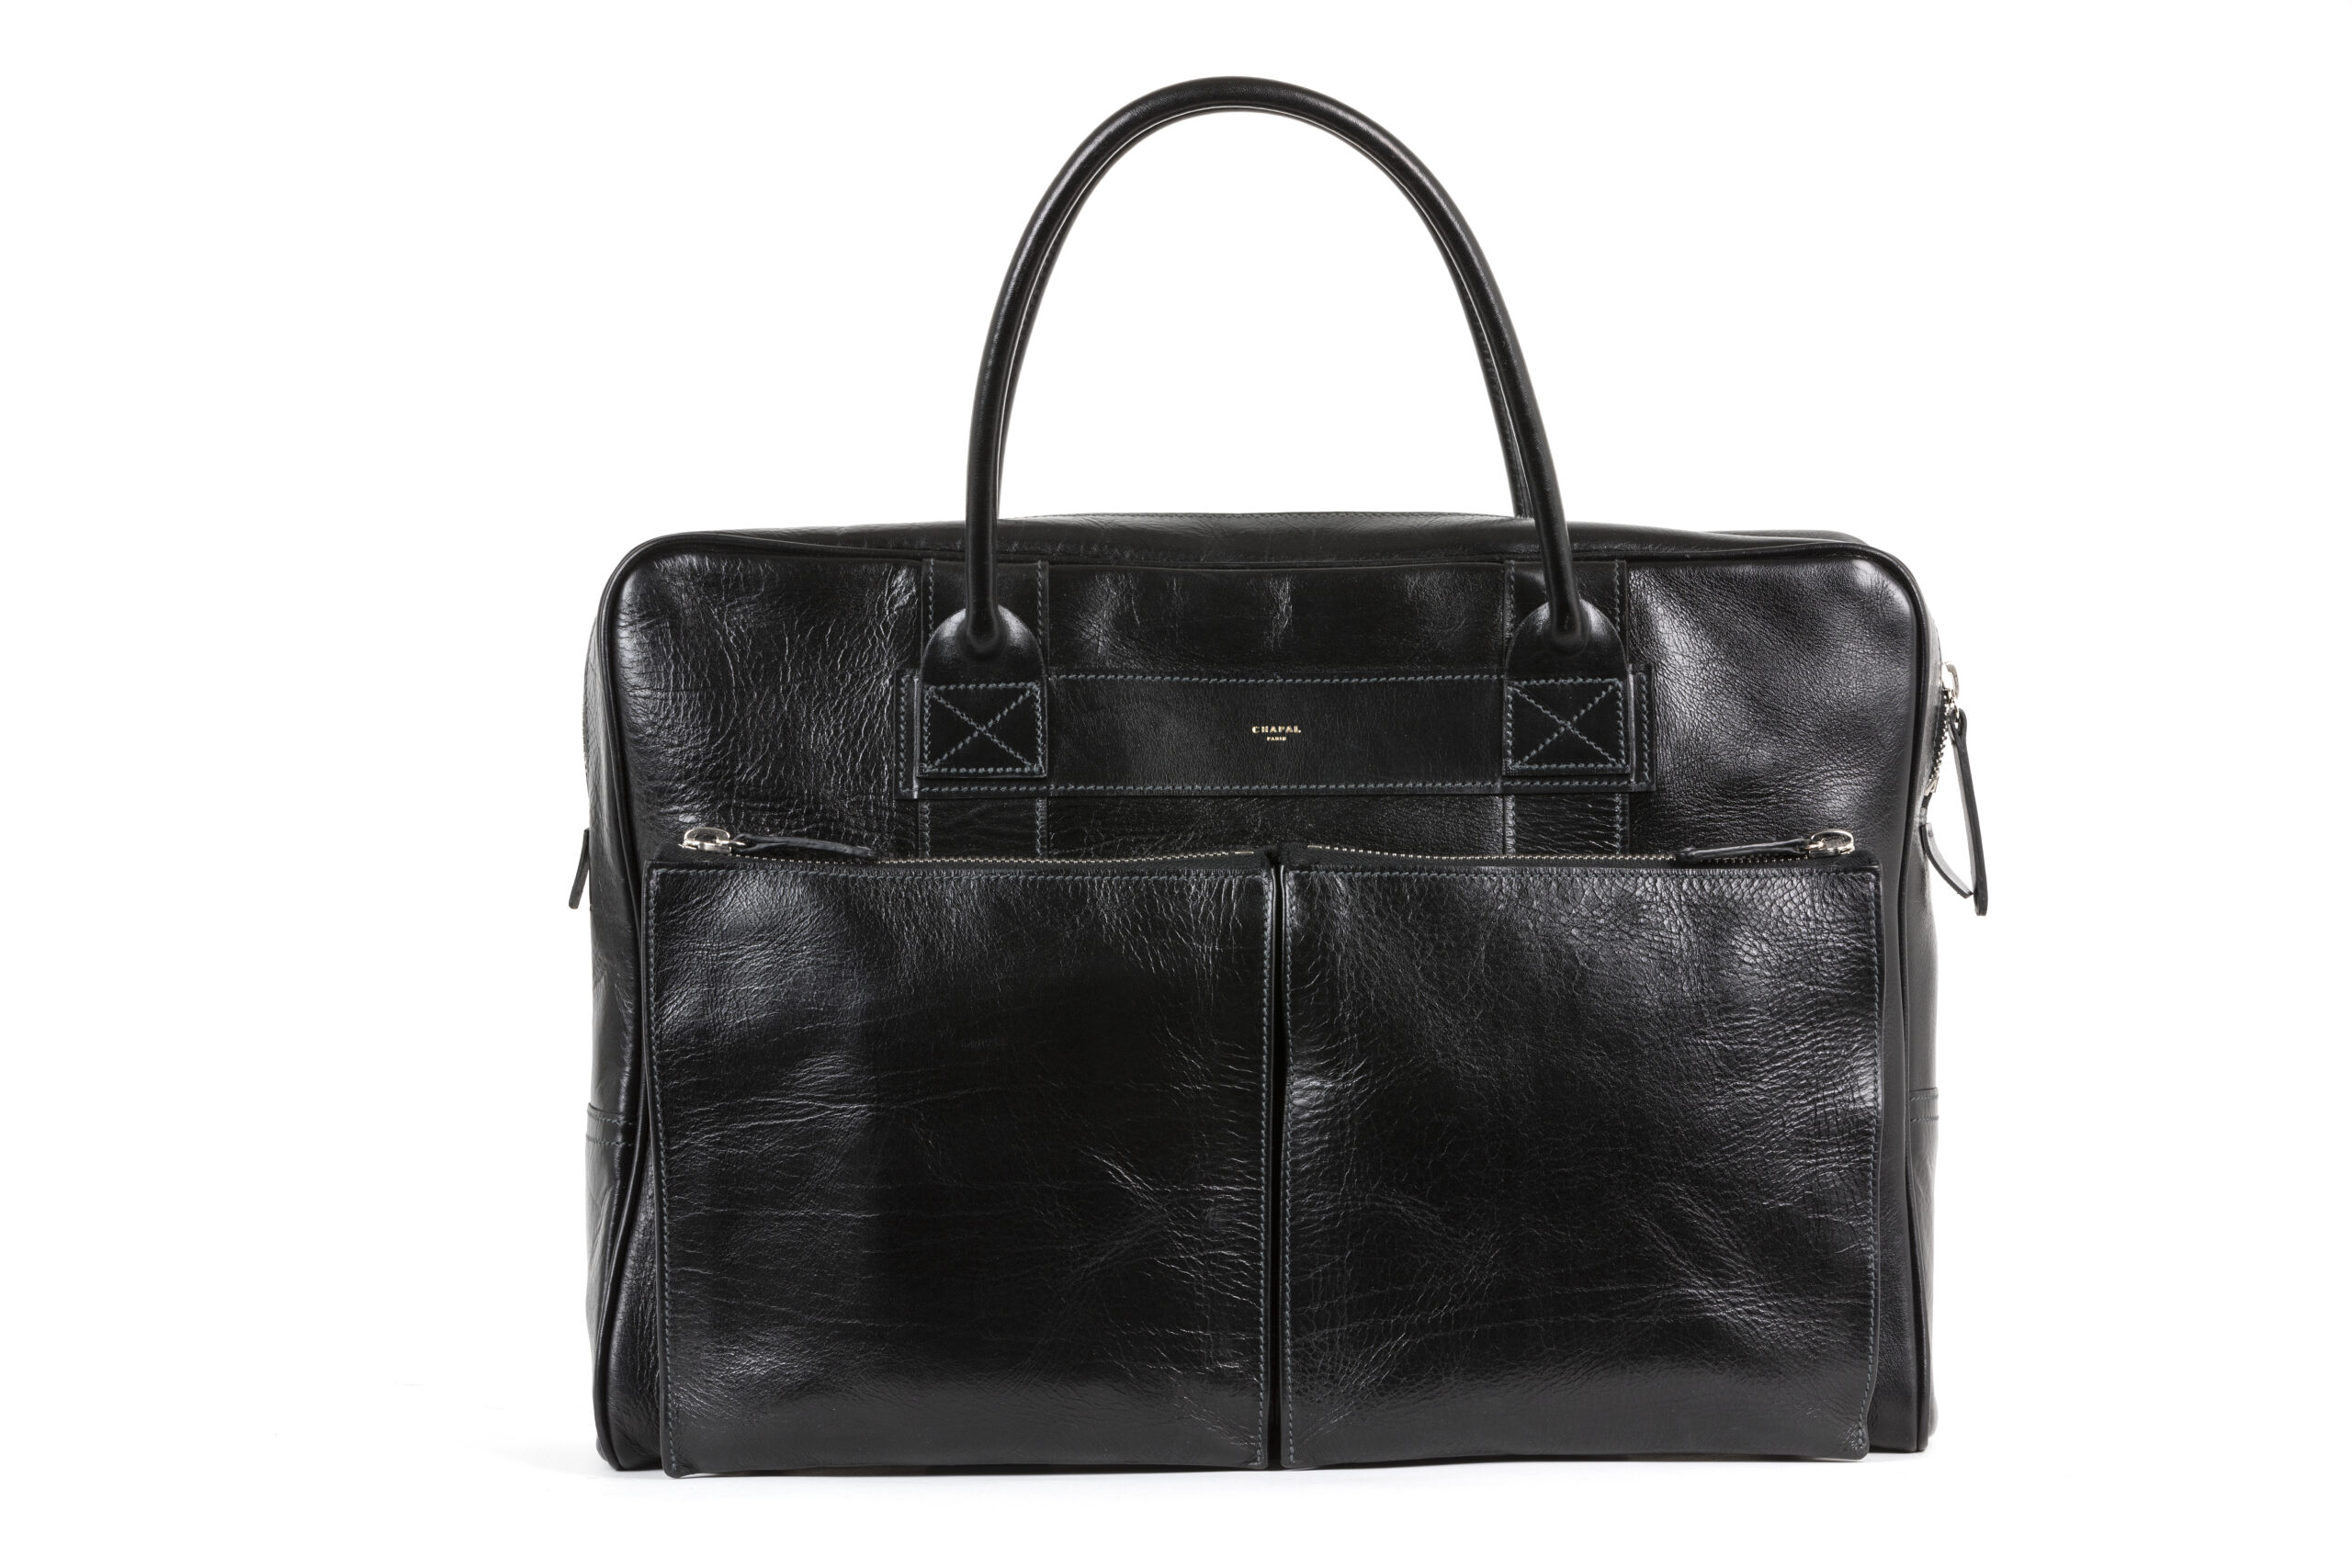 Captain Briefcase - Glossy leather - Black color - Home Page